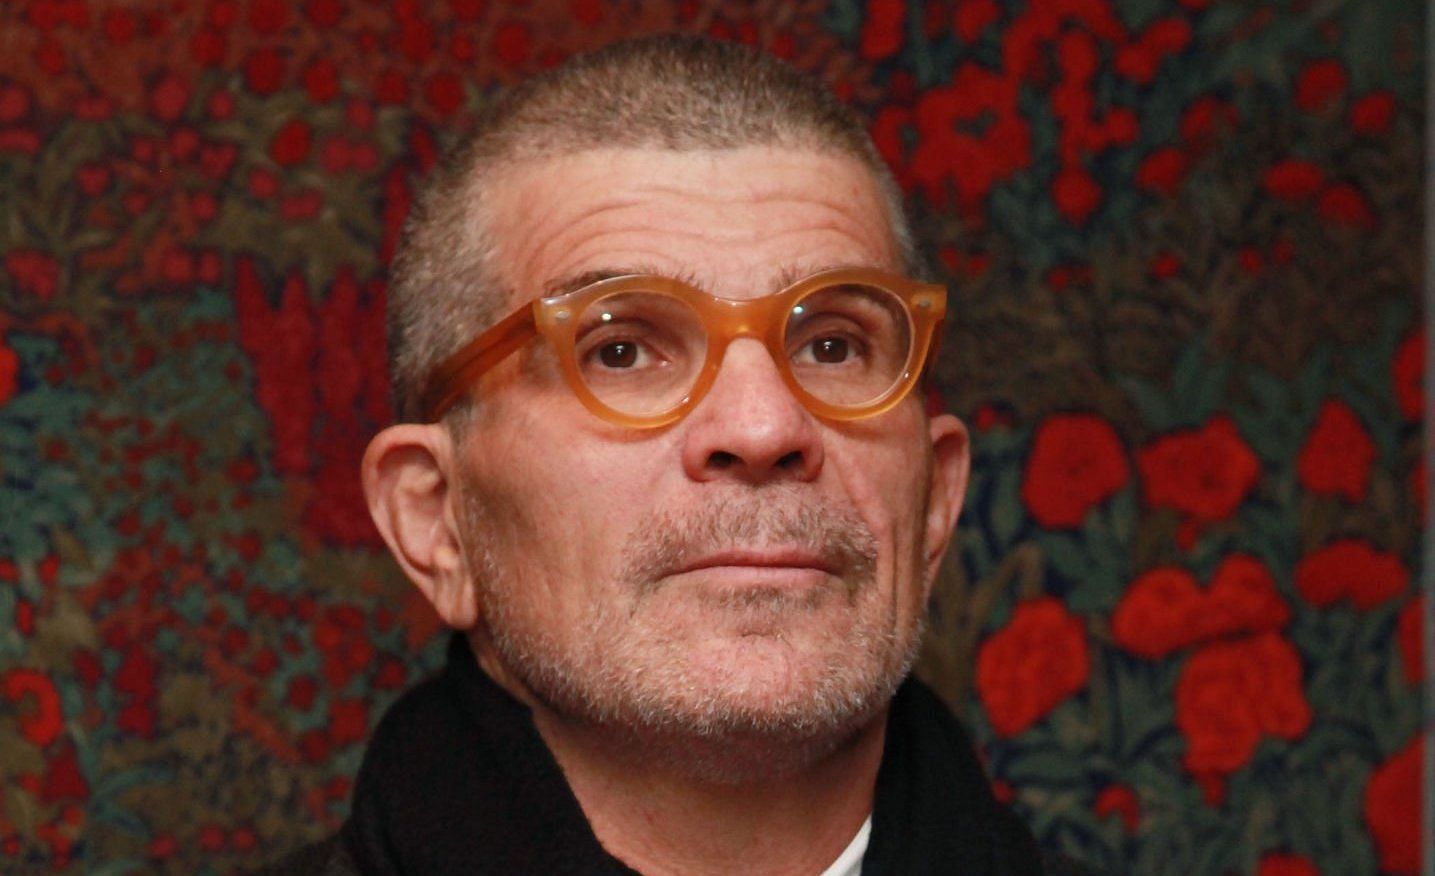 David Mamet sparked backlash for his comments on teachers (Image via Astrid Stawiarz/Getty Images)